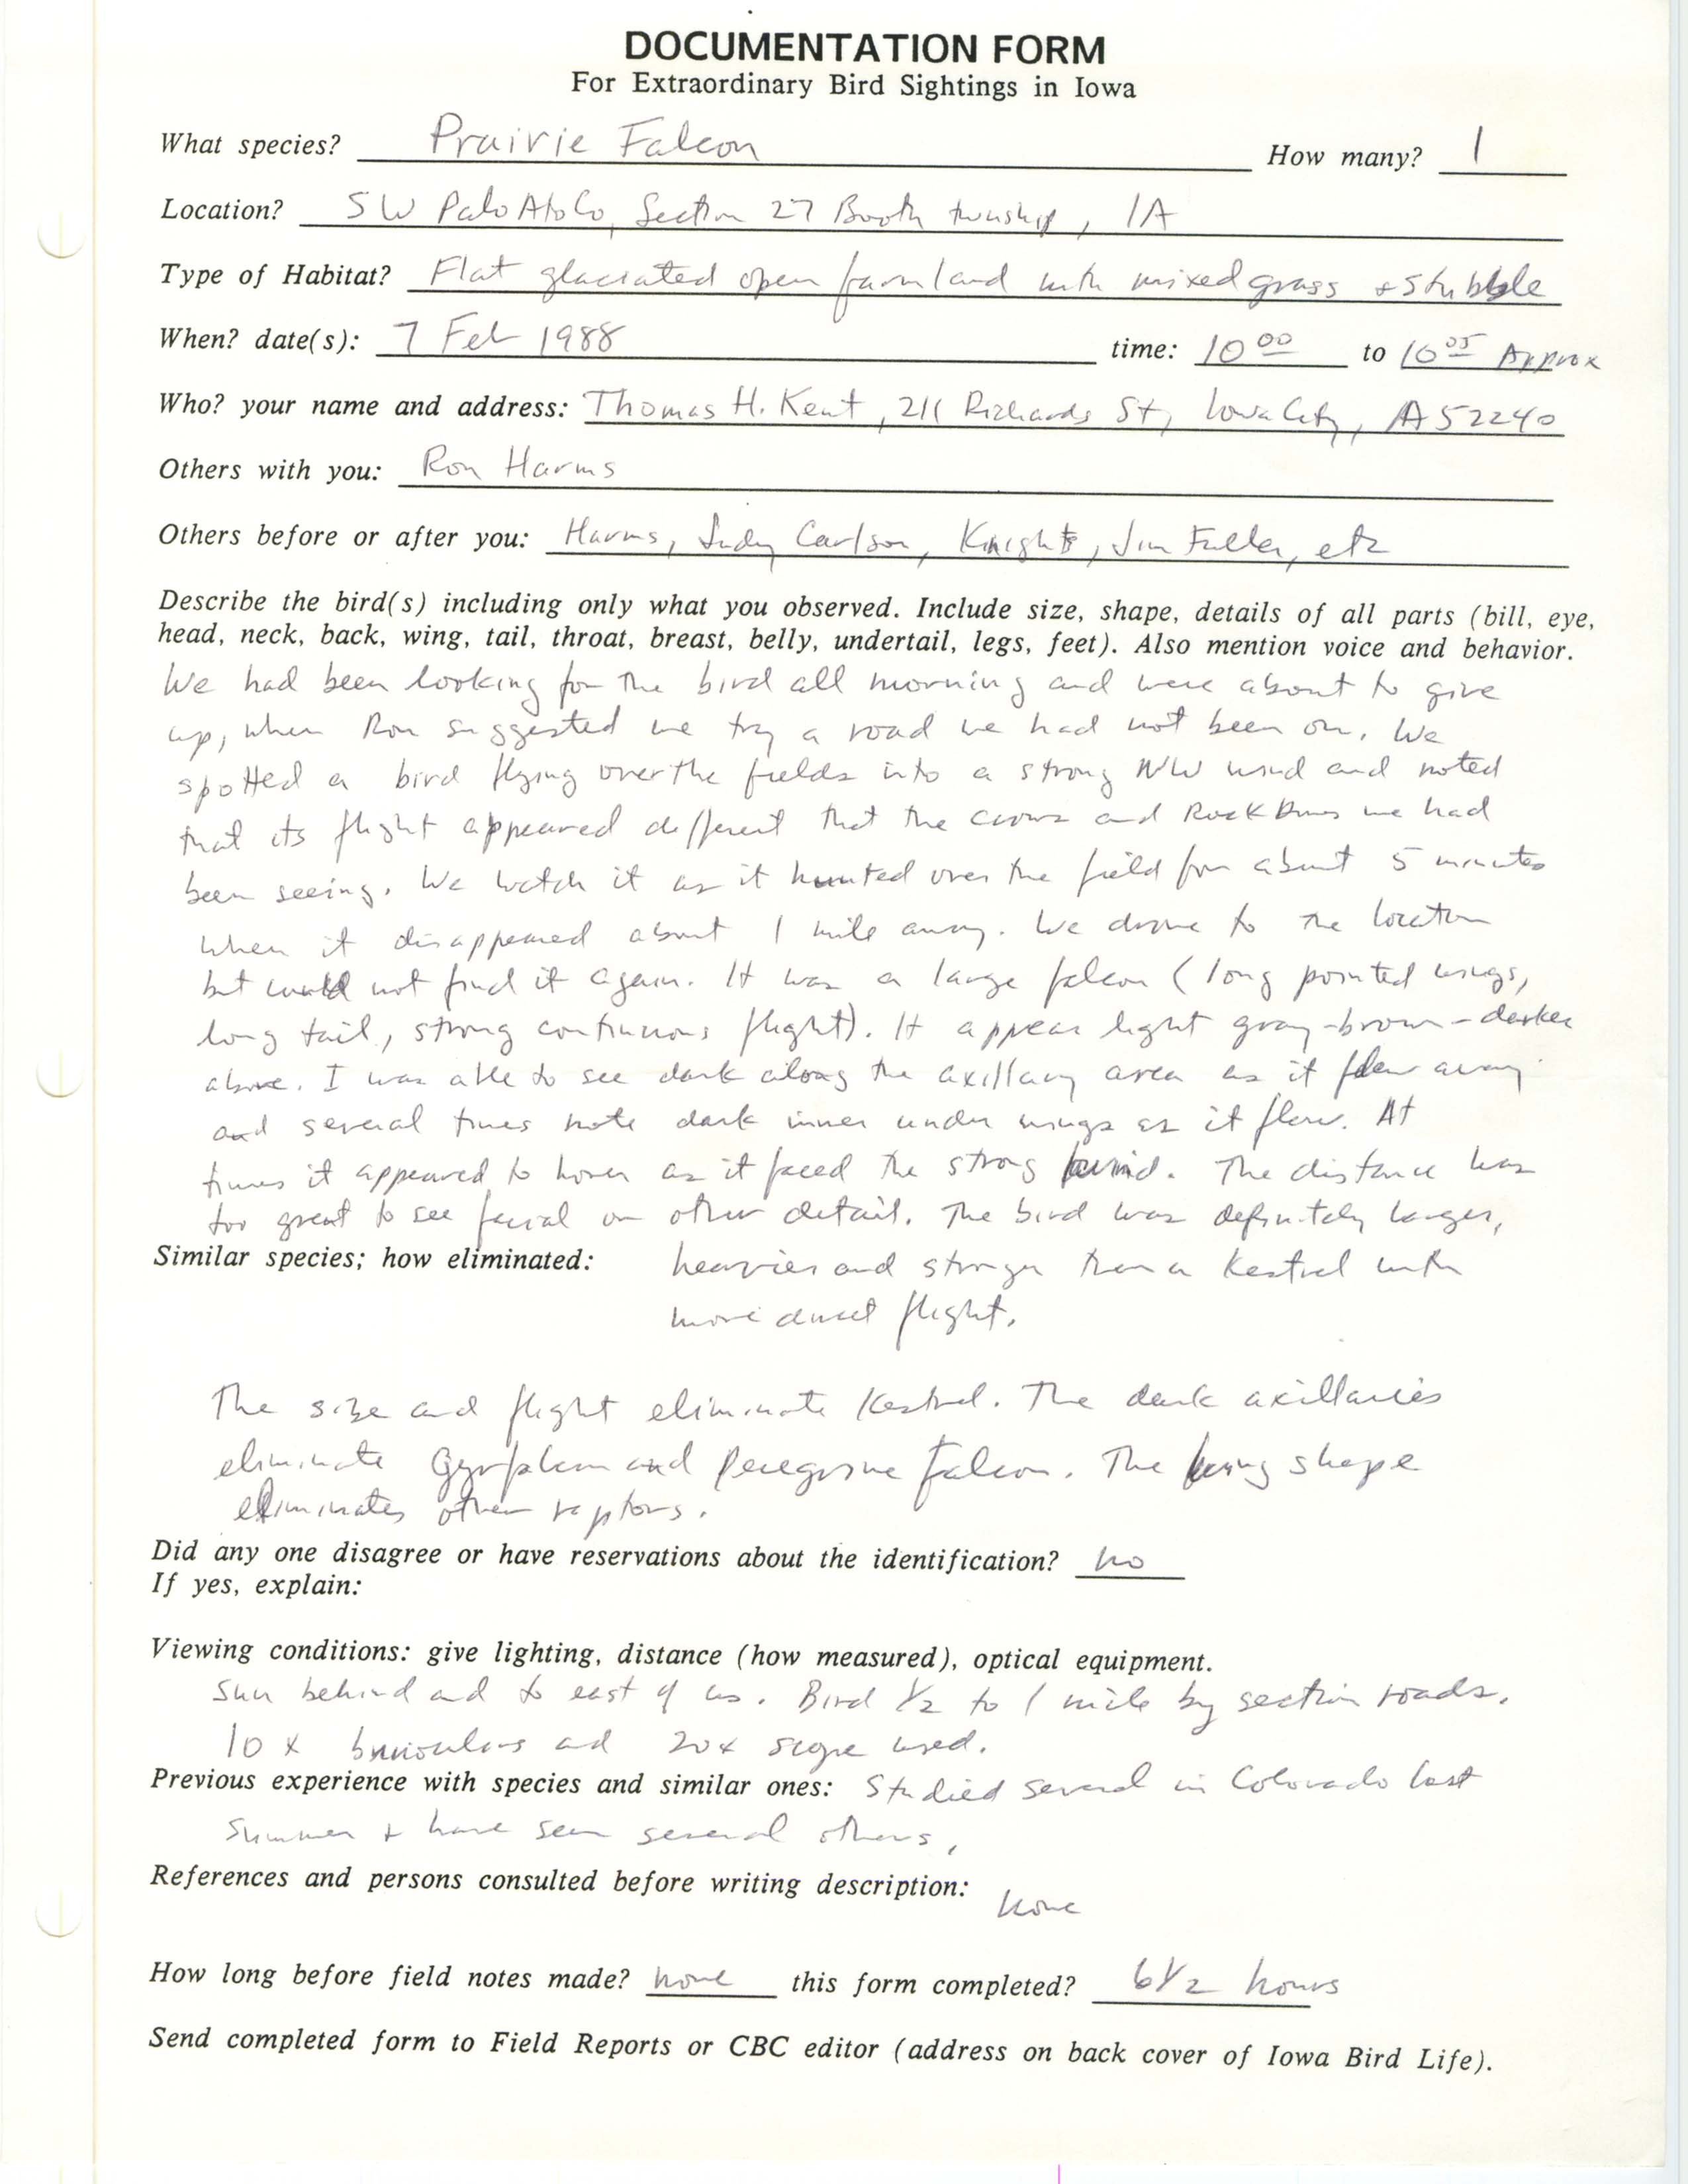 Rare bird documentation form for Prairie Falcon at Booth Township in Palo Alto County, 1988